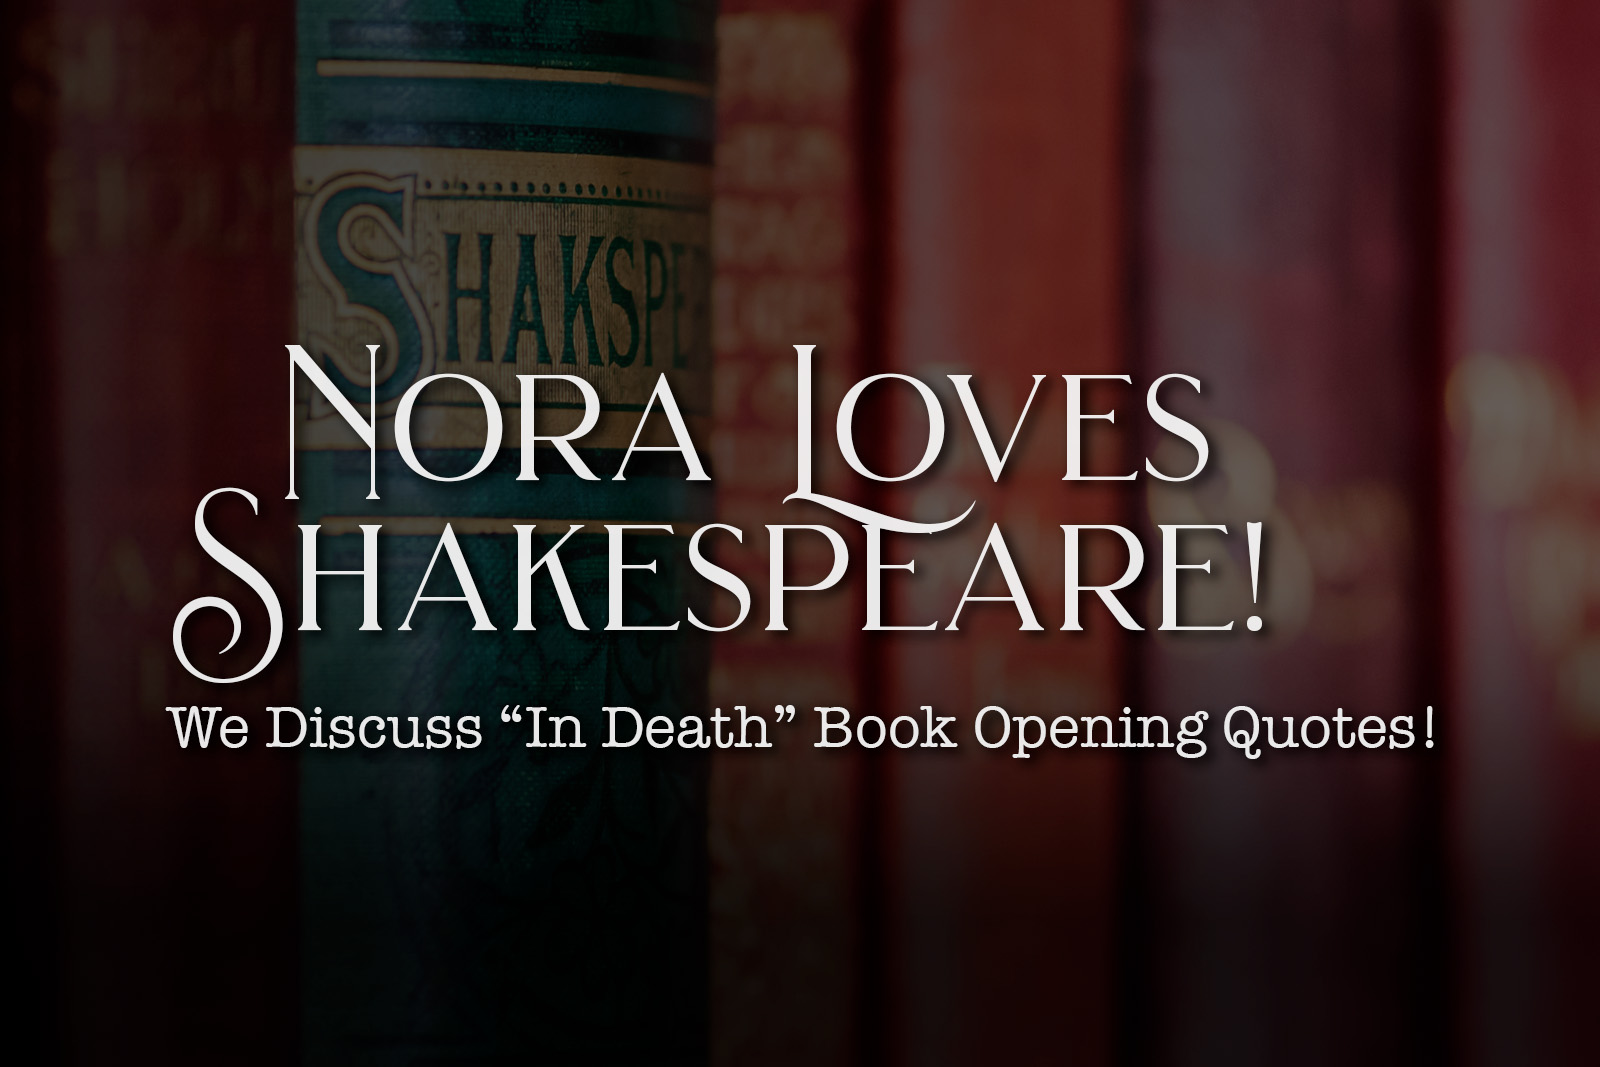 Nora Loves Shakespeare! We Discuss “In Death” Book Opening Quotes